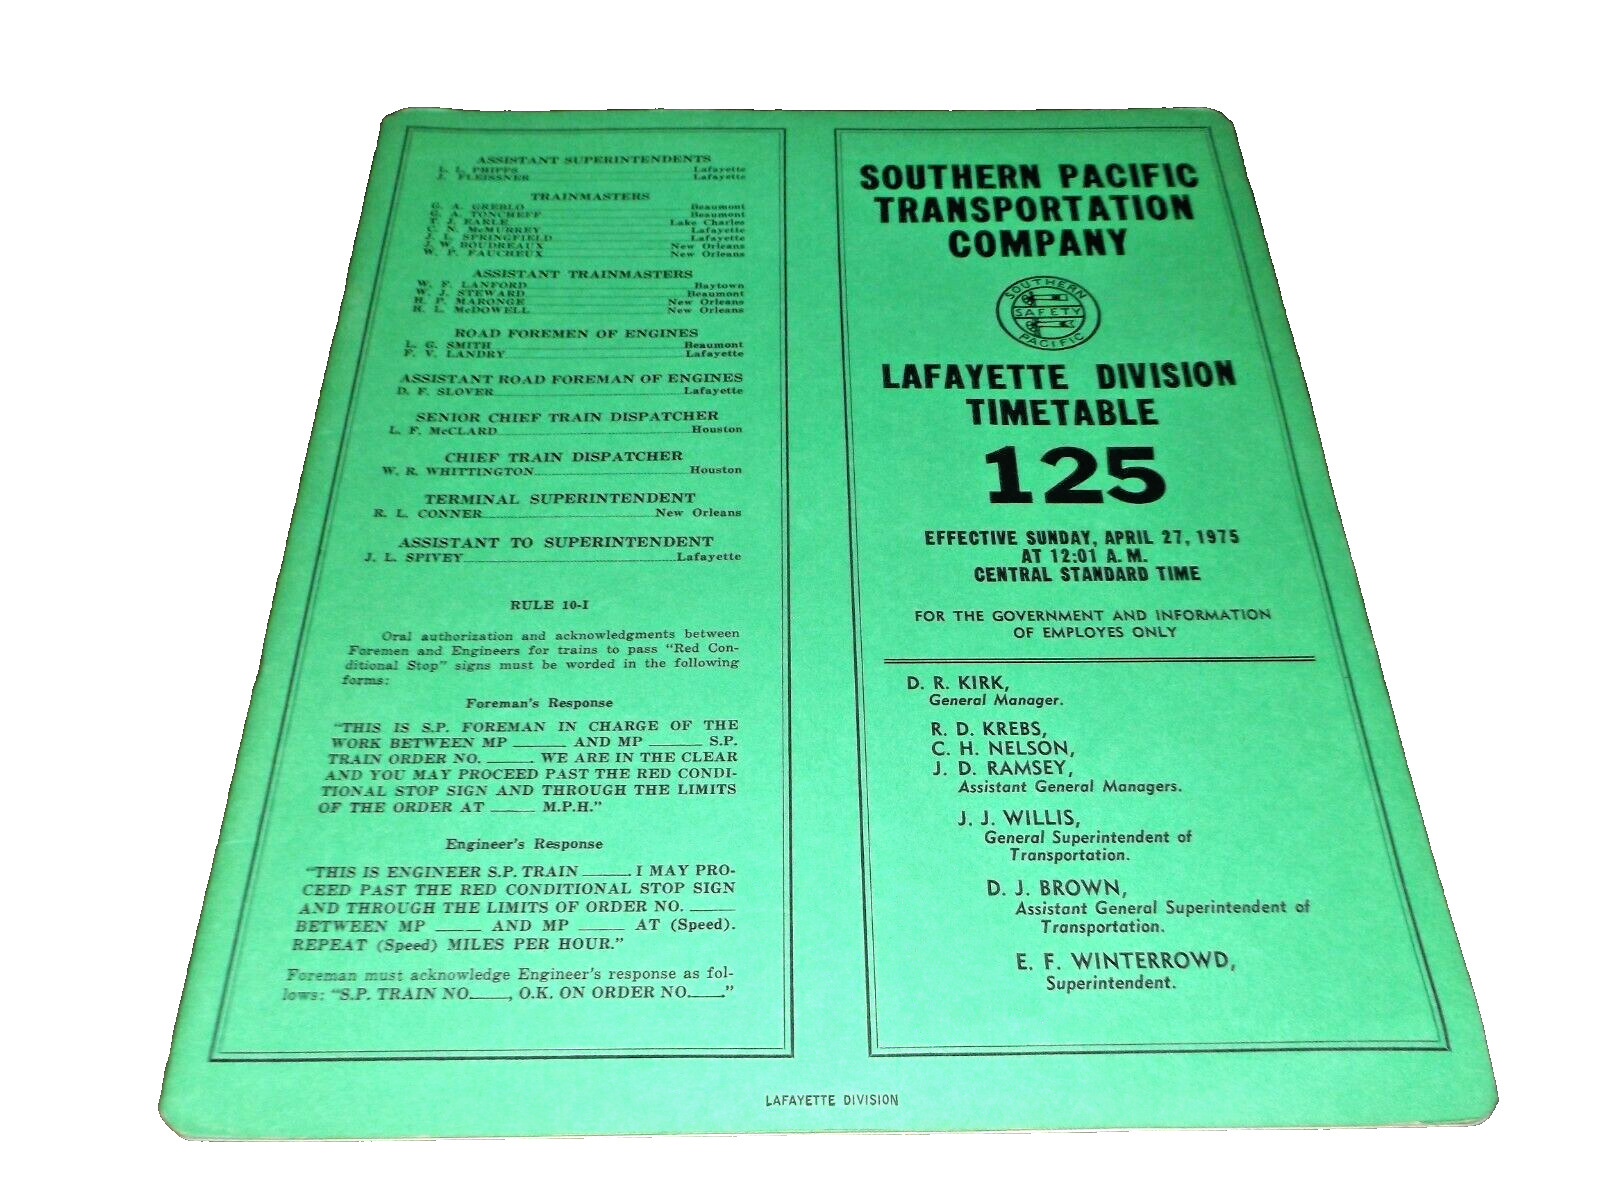 APRIL 1975 SOUTHERN PACIFIC LAFAYETTE DIVISION EMPLOYEE TIMETABLE #125